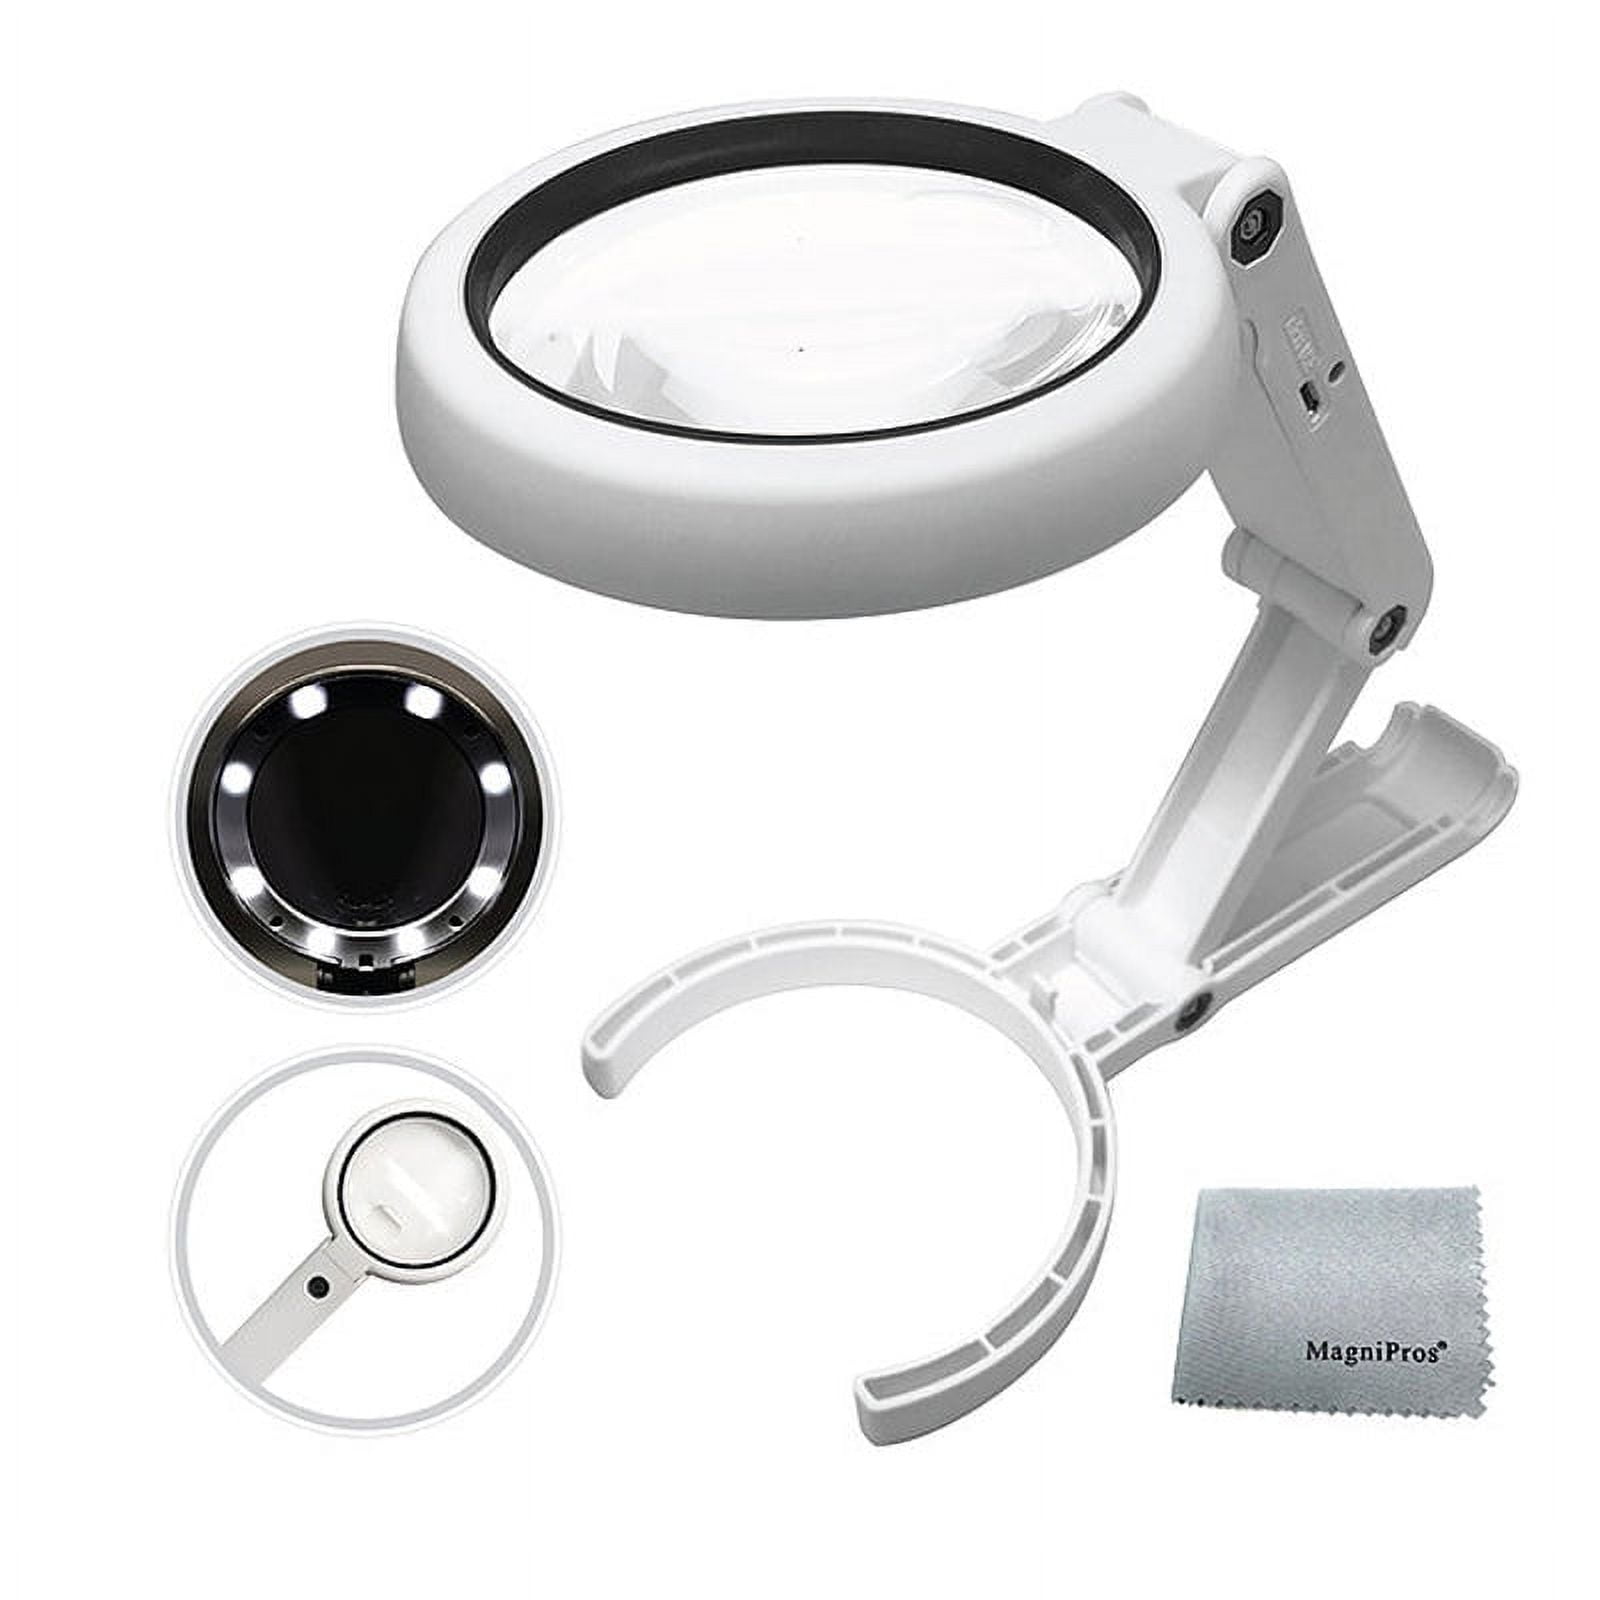  VISION AID 30X Hands-Free Magnifying Glass with 21 LED